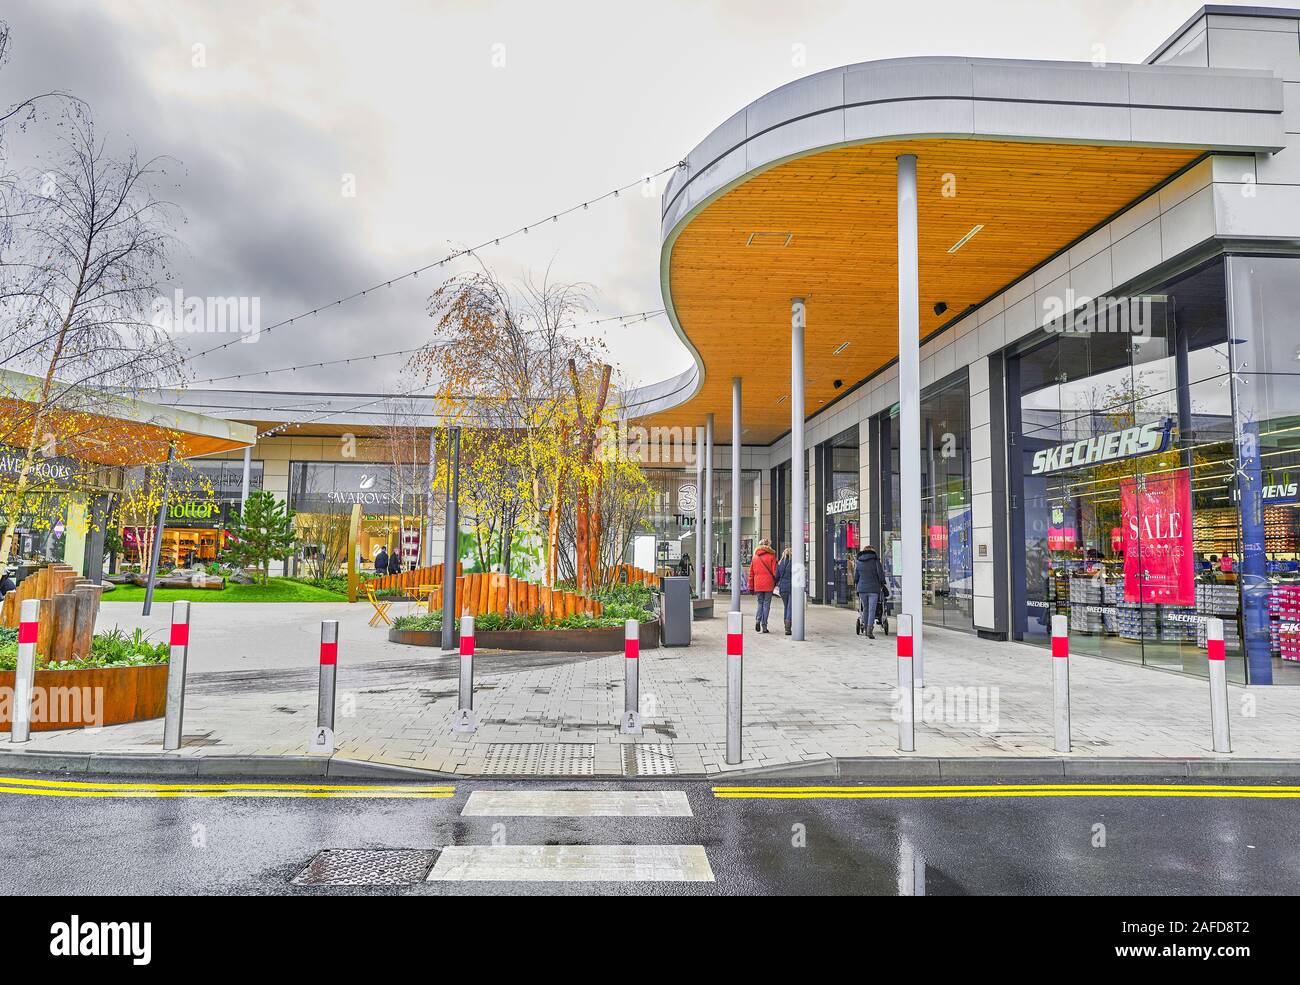 Frugal Decorar Calle Shopping arcade at Rushden Lakes shopping centre on a wet and rainy winter  day Stock Photo - Alamy